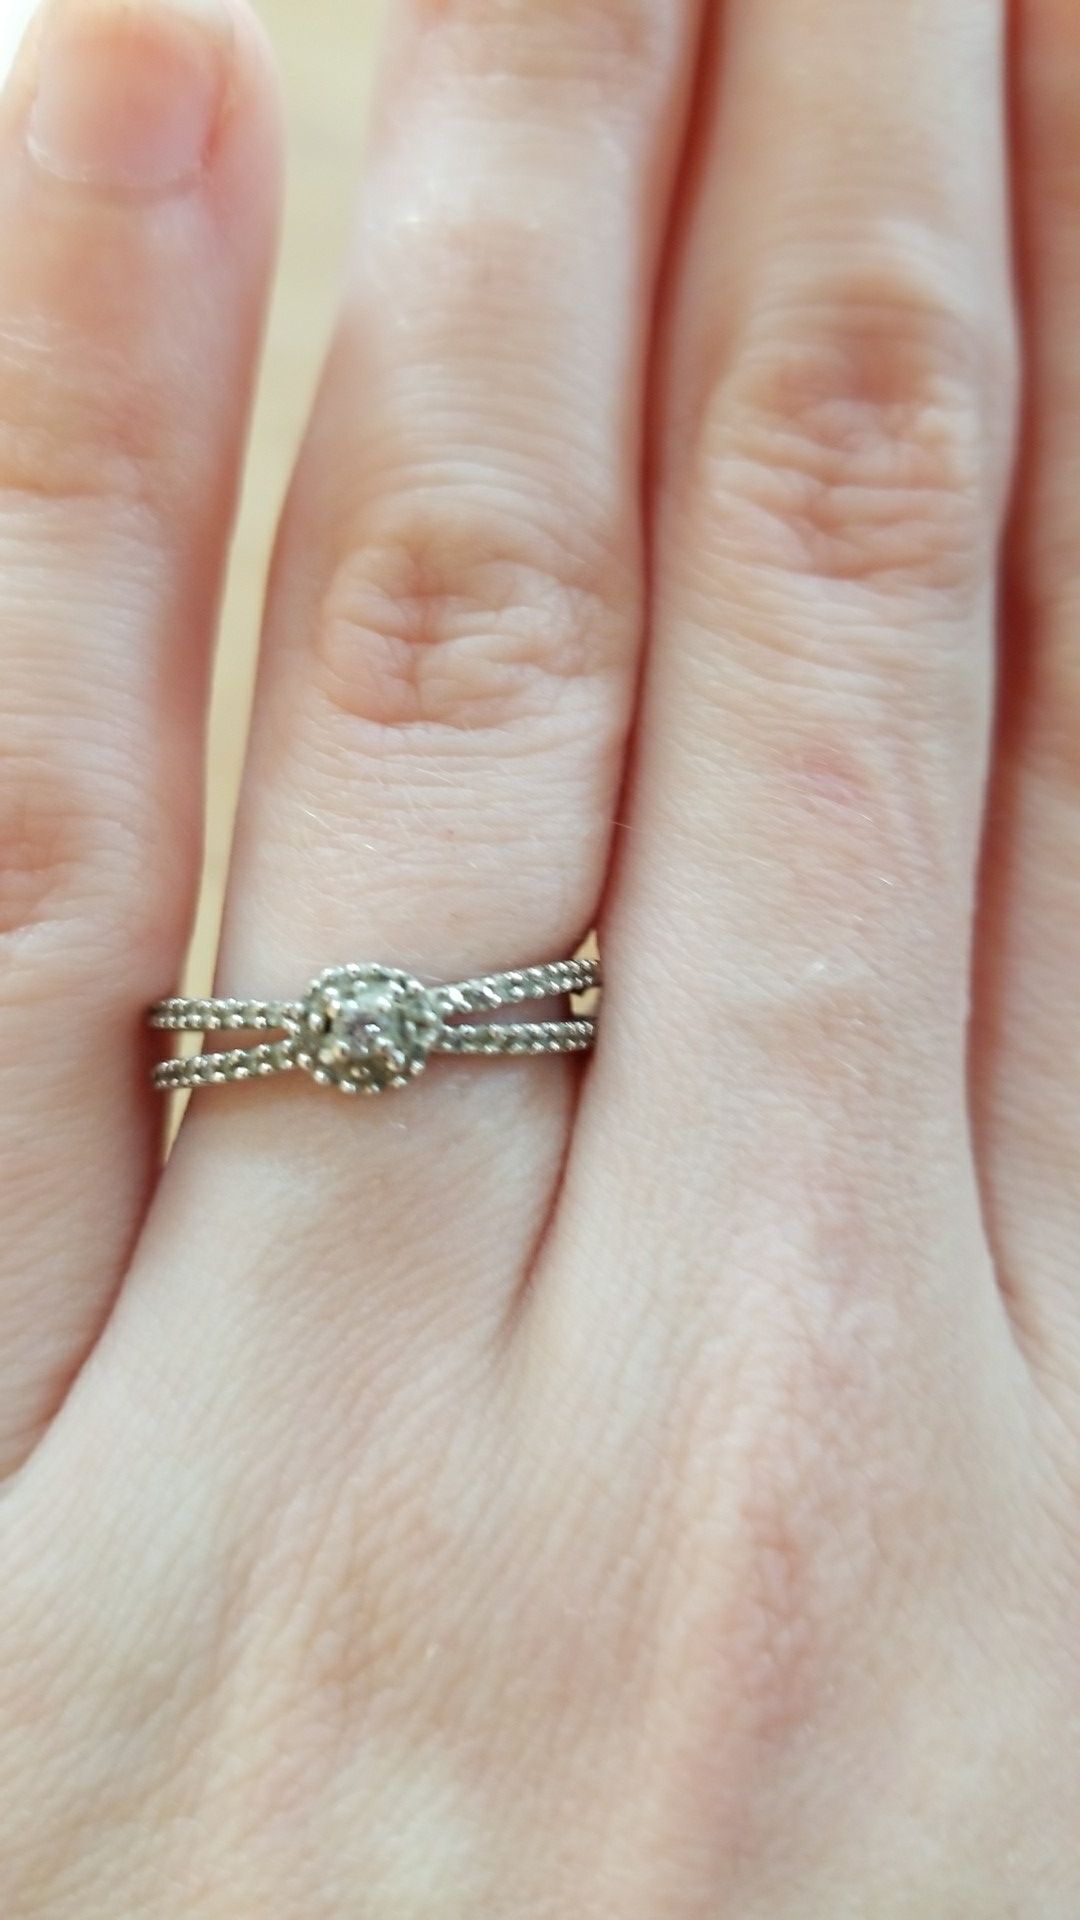 Small diamond and silver promise/engagement ring